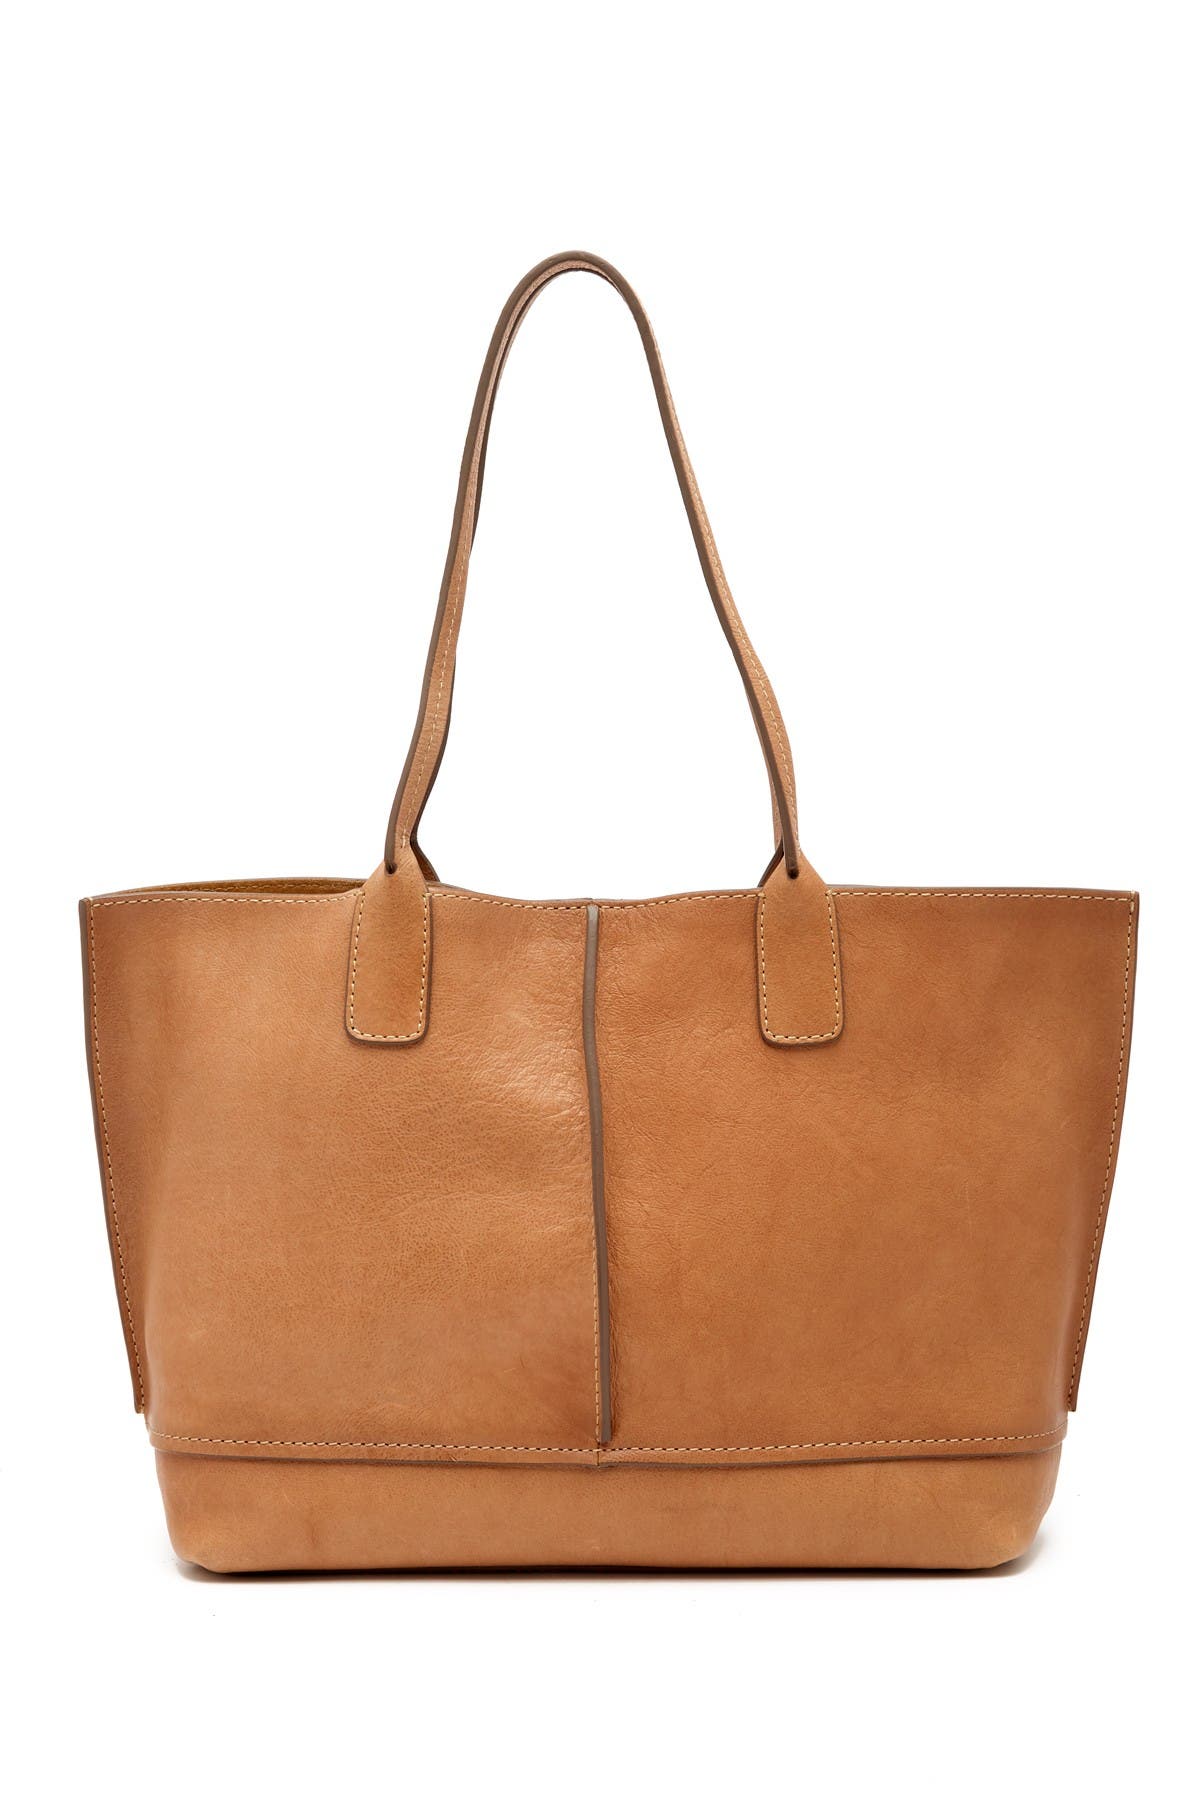 Frye | Lucy Leather Tote Bag | Nordstrom Rack